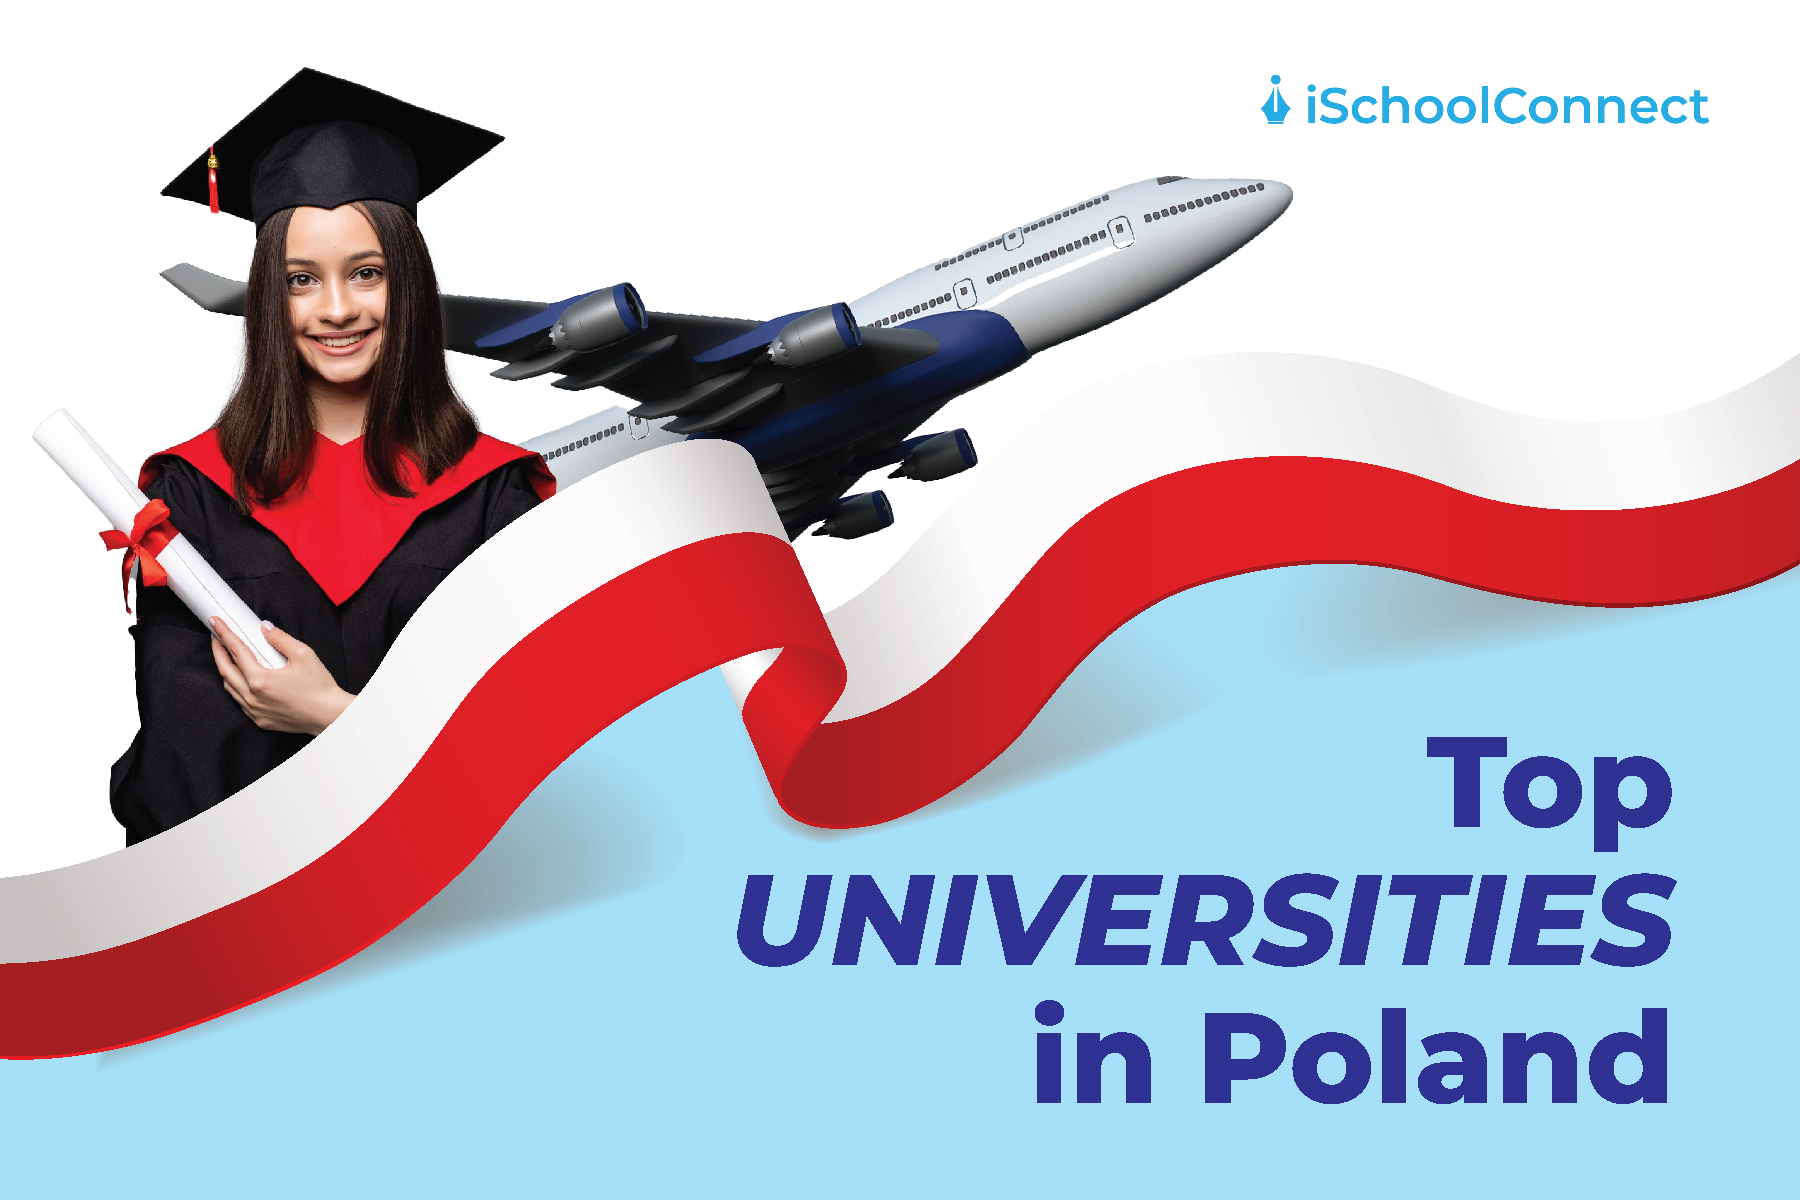 Why opt for top universities in Poland?